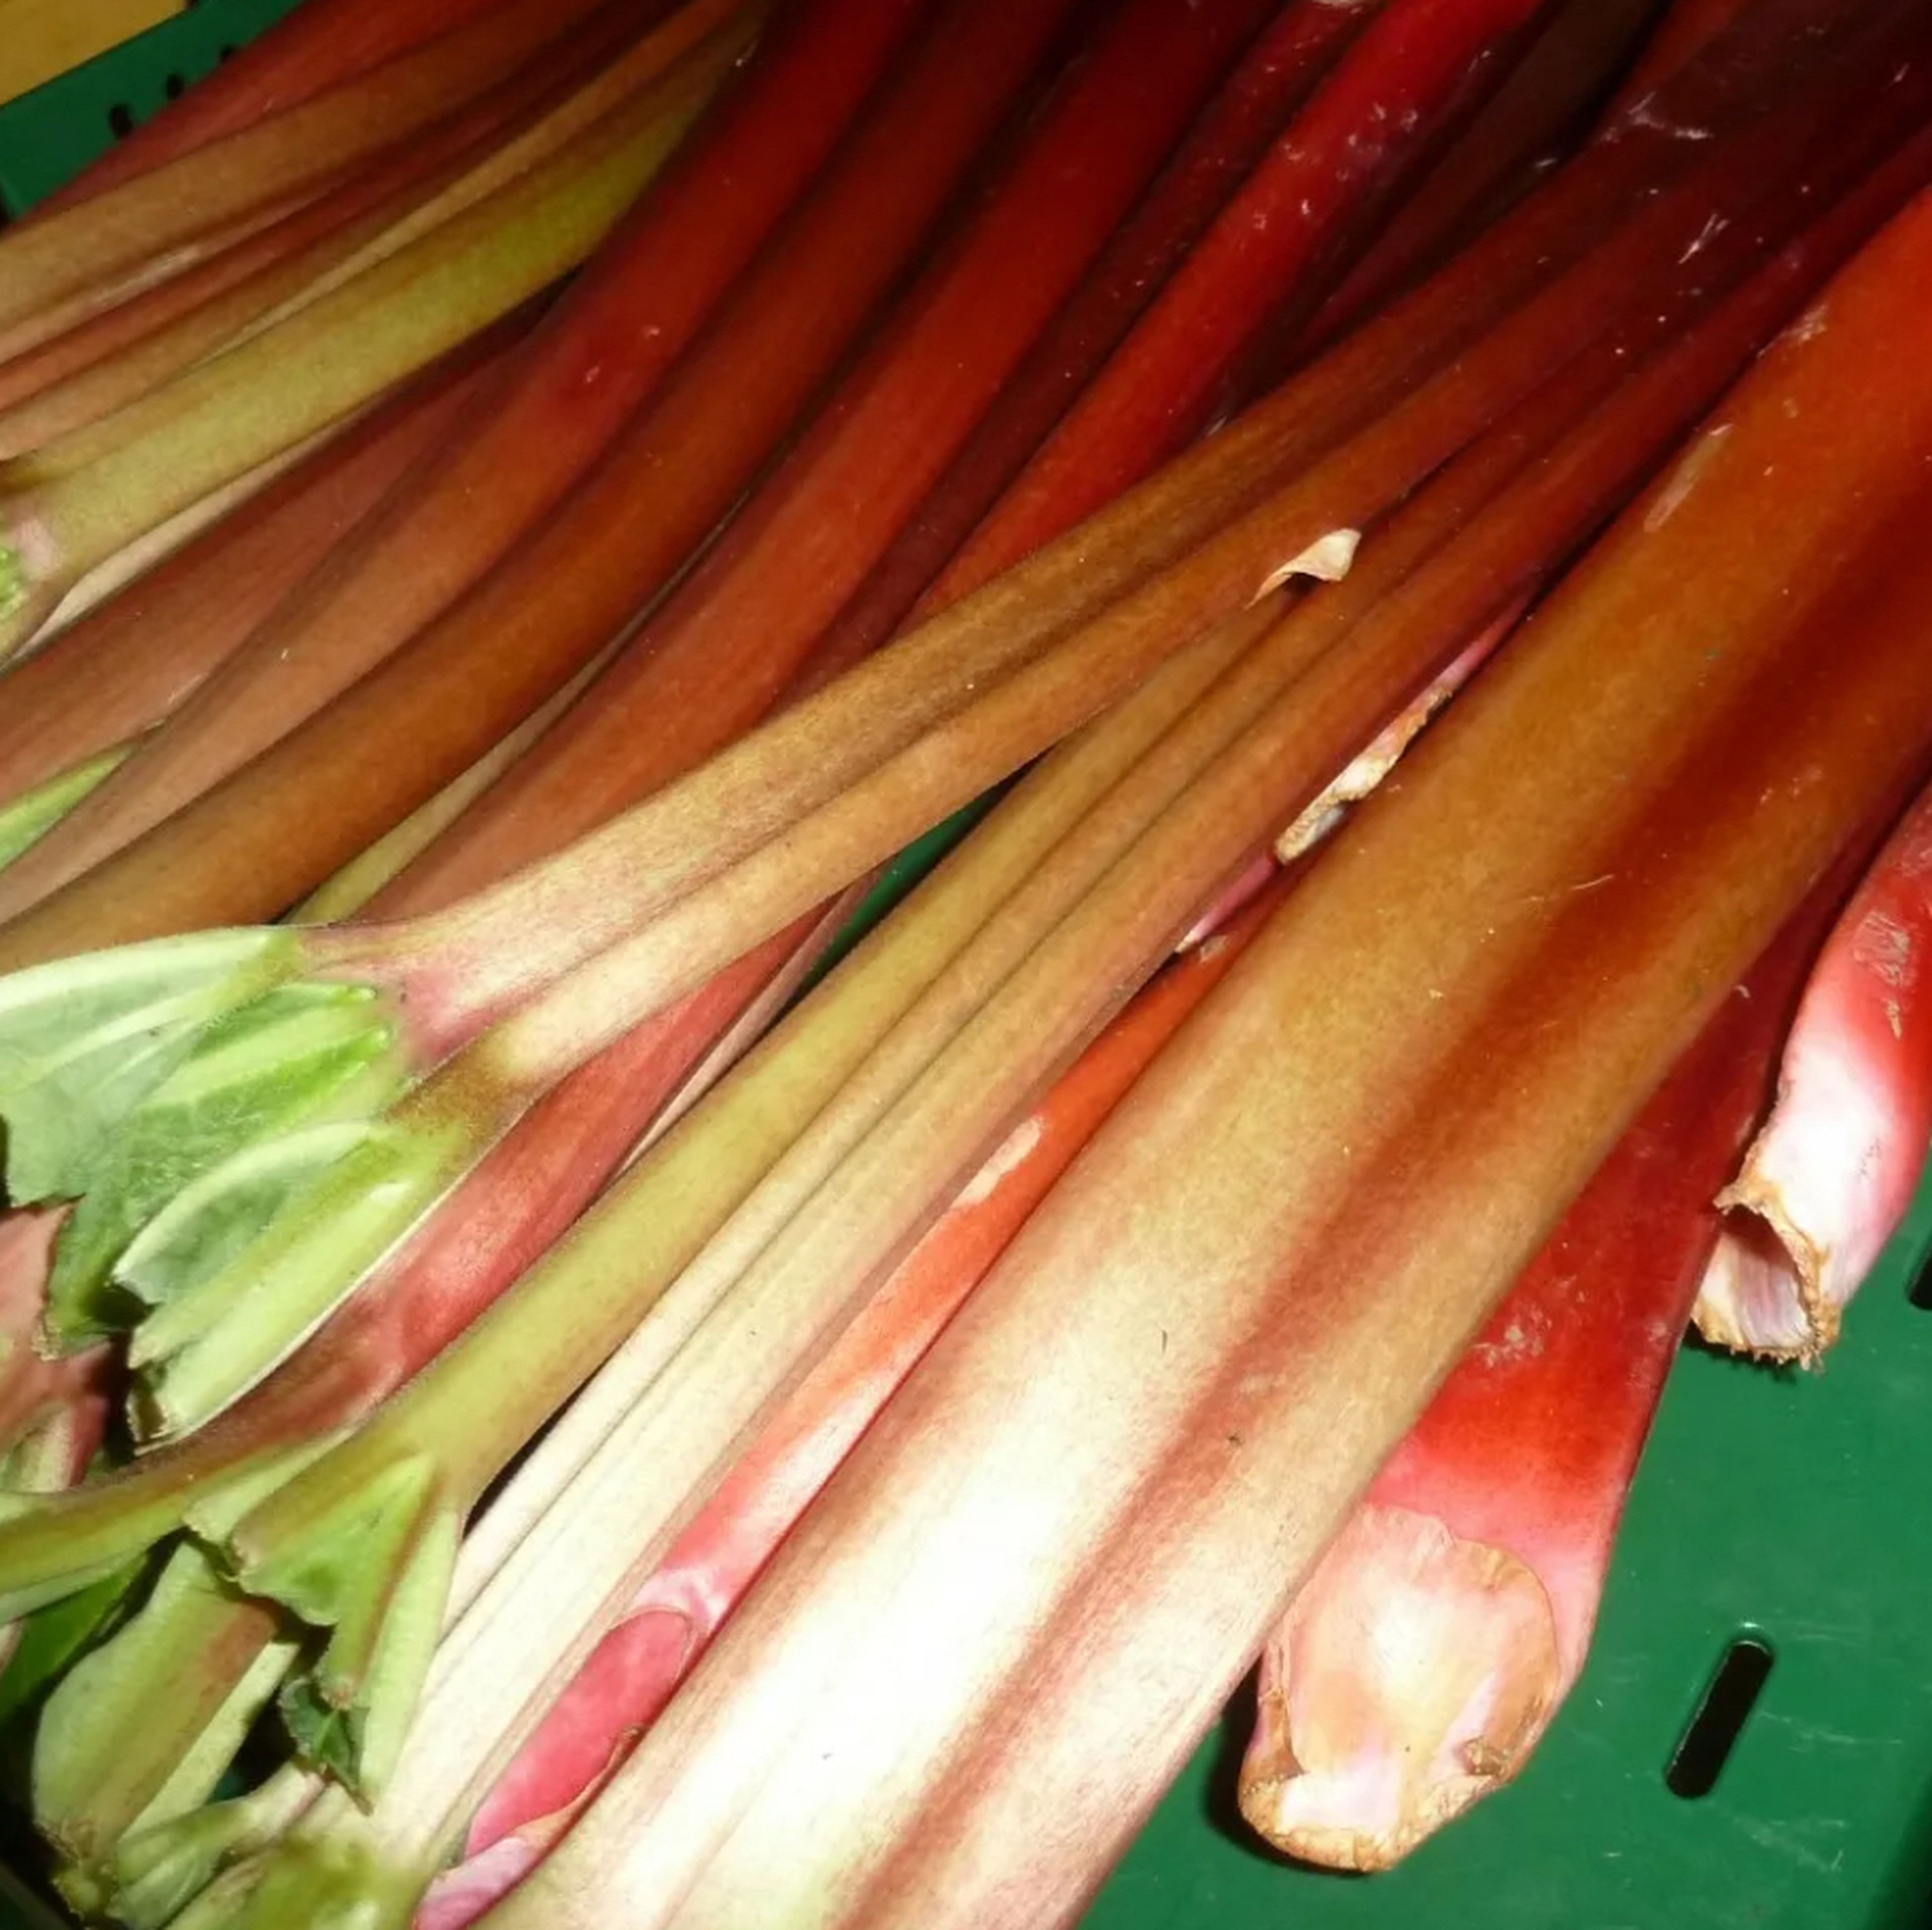 For the rhubarb syrup, trim the ends of 2 kg of rhubarb, peel if needed, and cut away any brown spots. Young rhubarb requires little to no peeling.